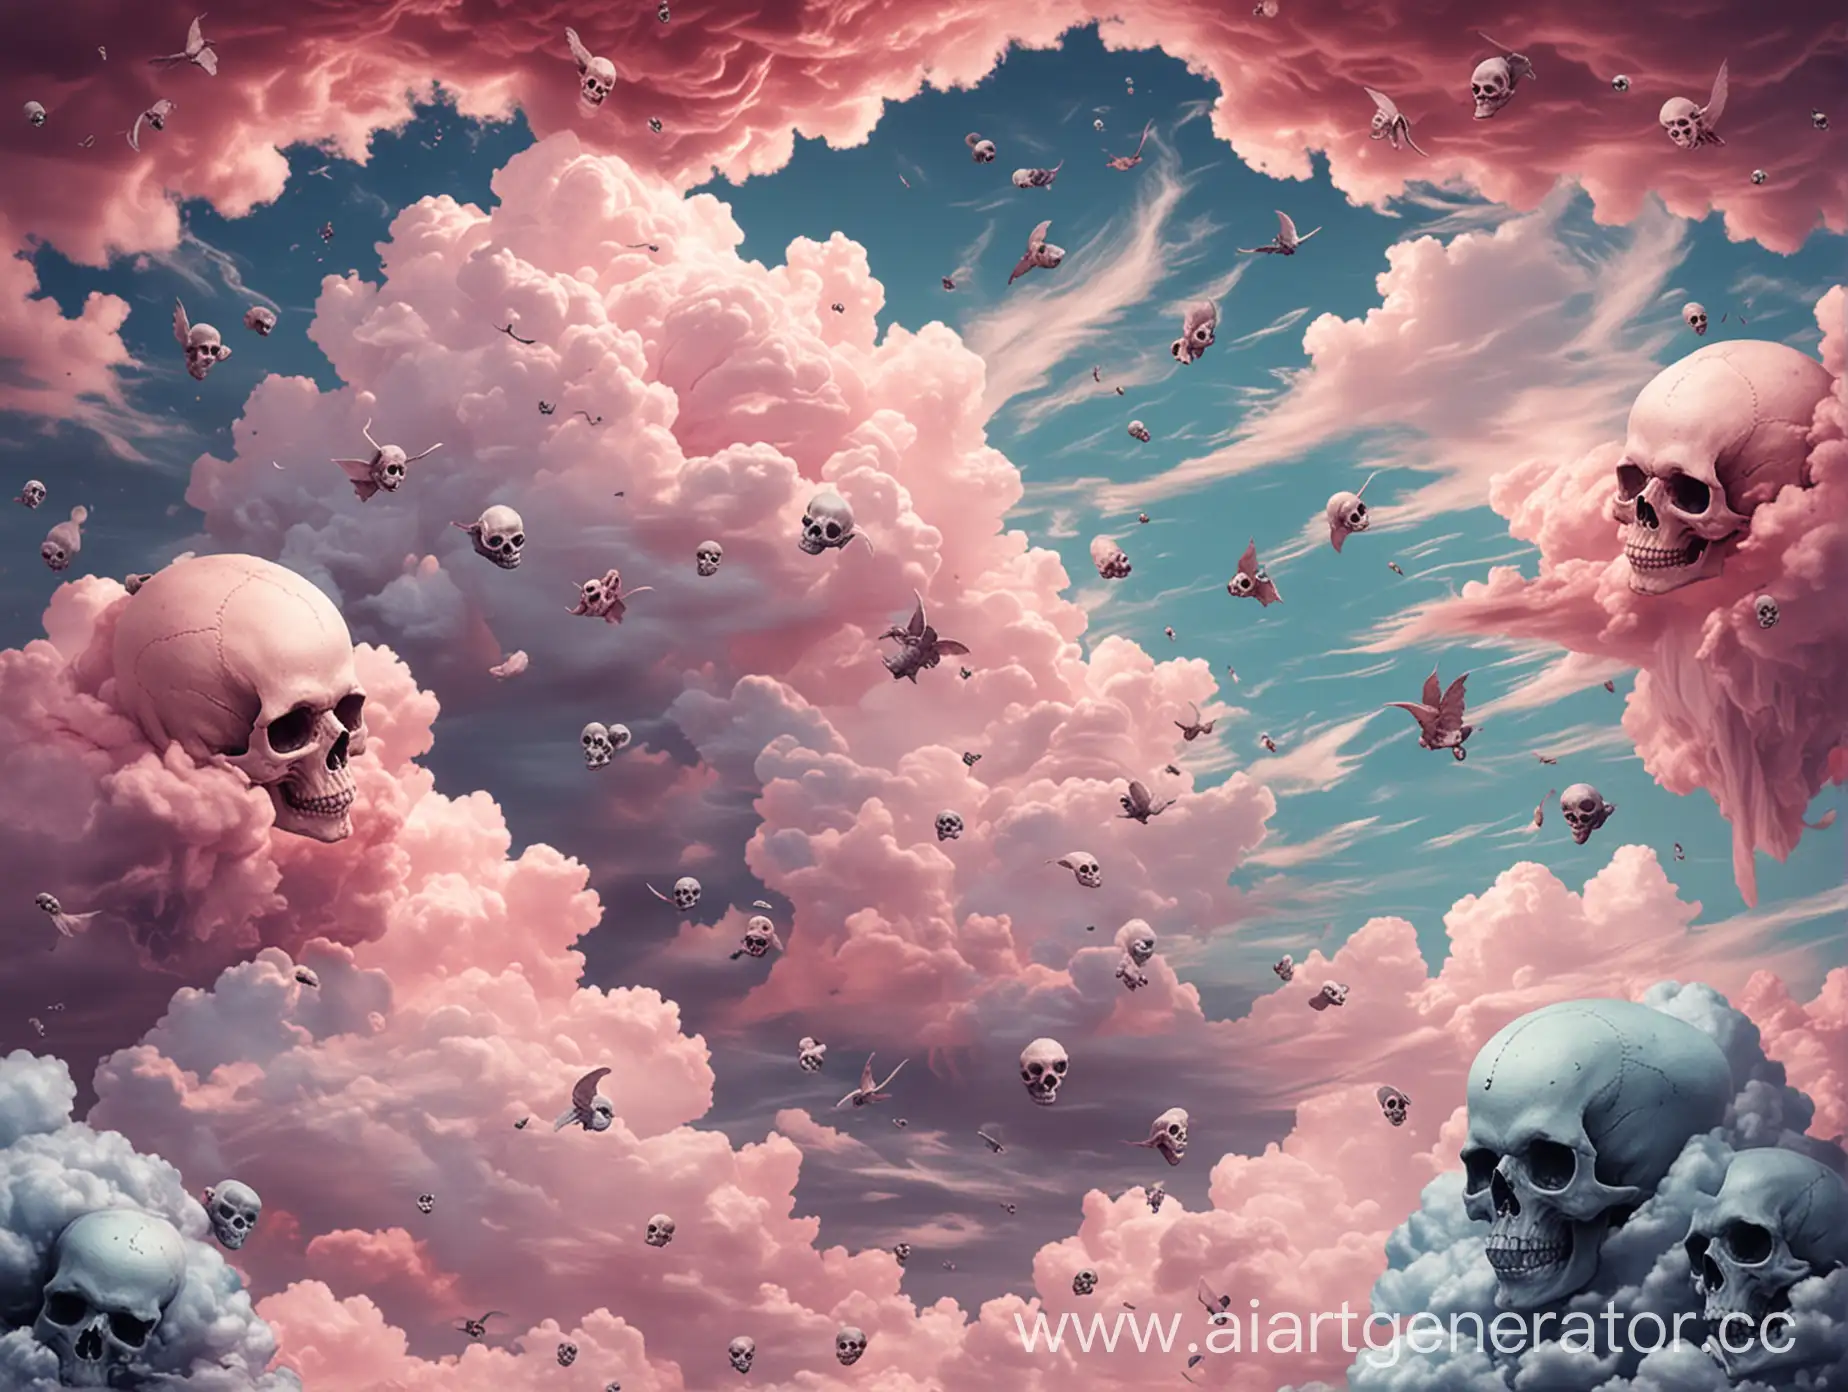 Ethereal-Sky-with-Subtle-Skull-Motif